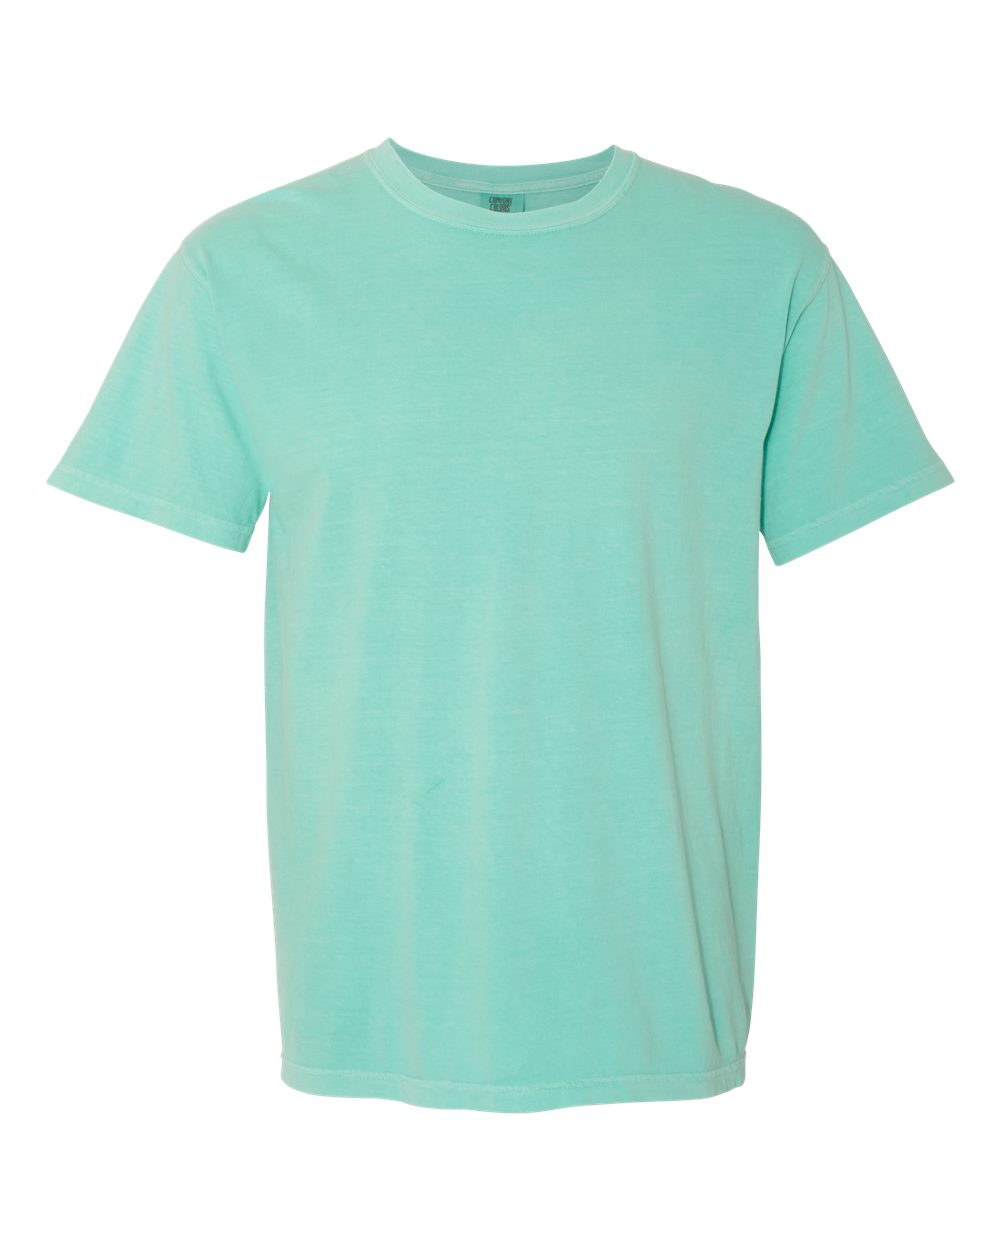 Comfort Colors Garment-Dyed Tee (1717) in Chalky Mint